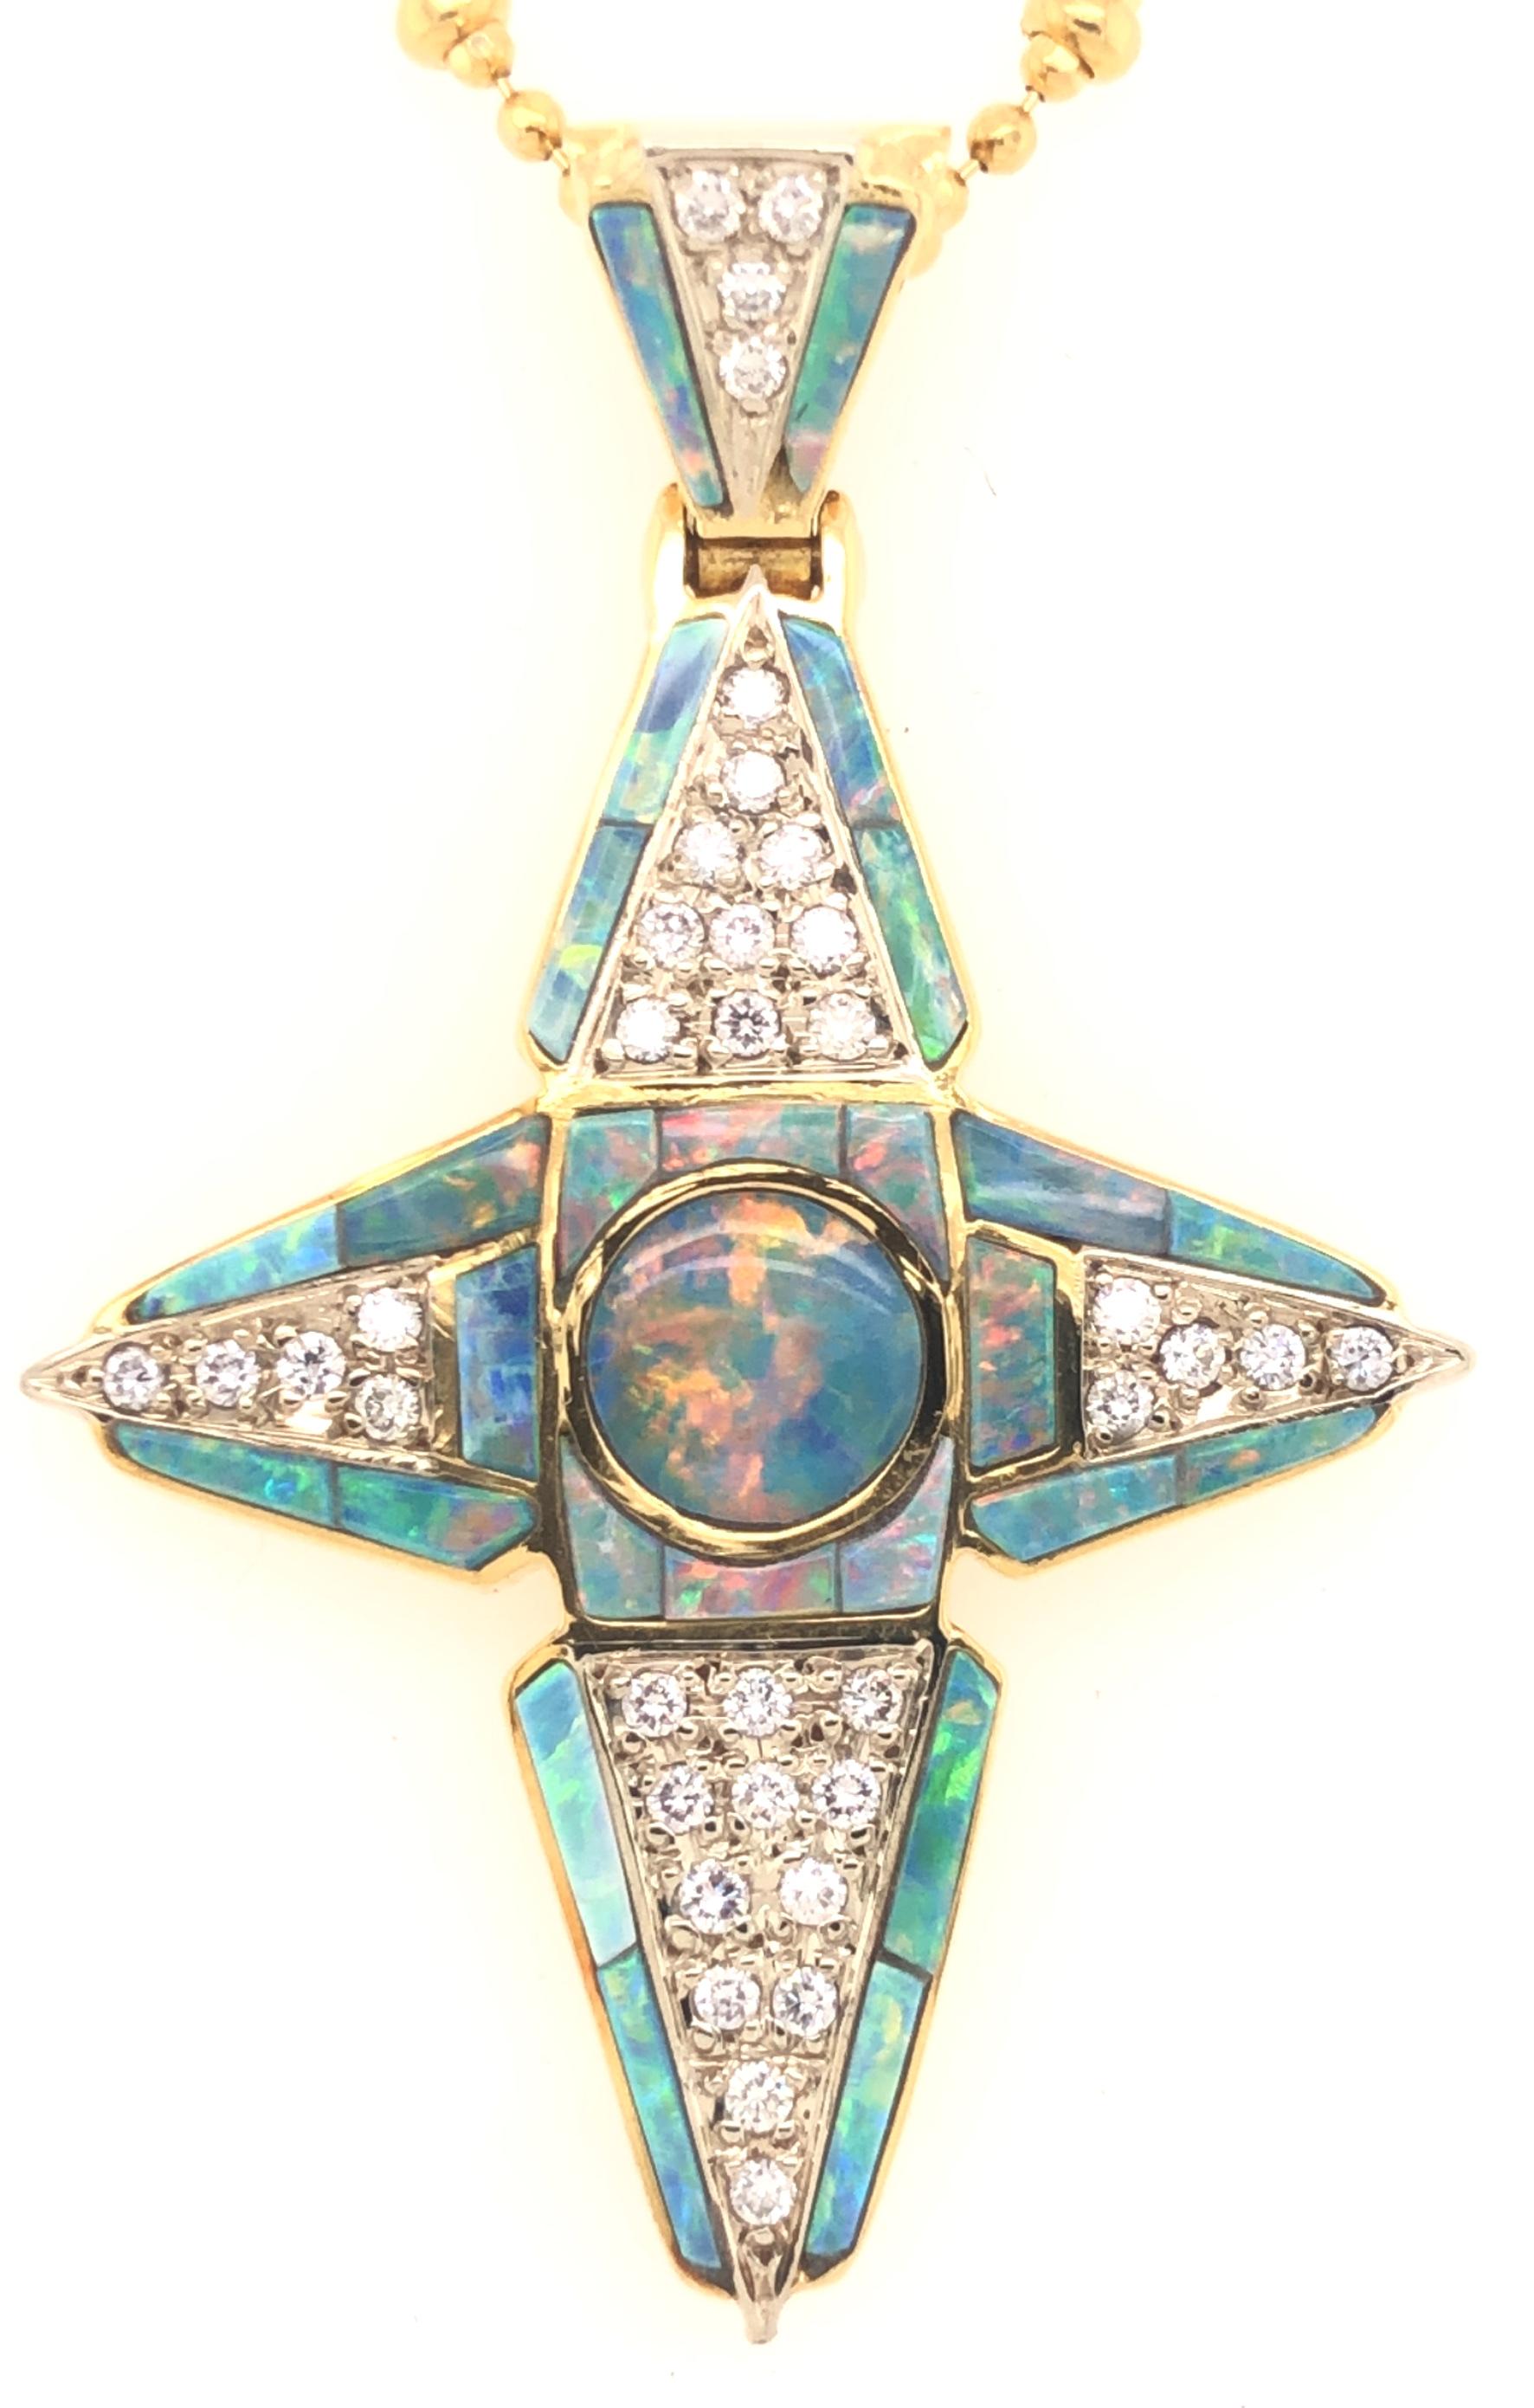 One of a kind design crafted in 18k yellow gold. This cross pendant is set with natural black opal gemstones with diamond accents. The pendant shows one solitary black opal gemstone in the center that displays amazing play of color with flashes of